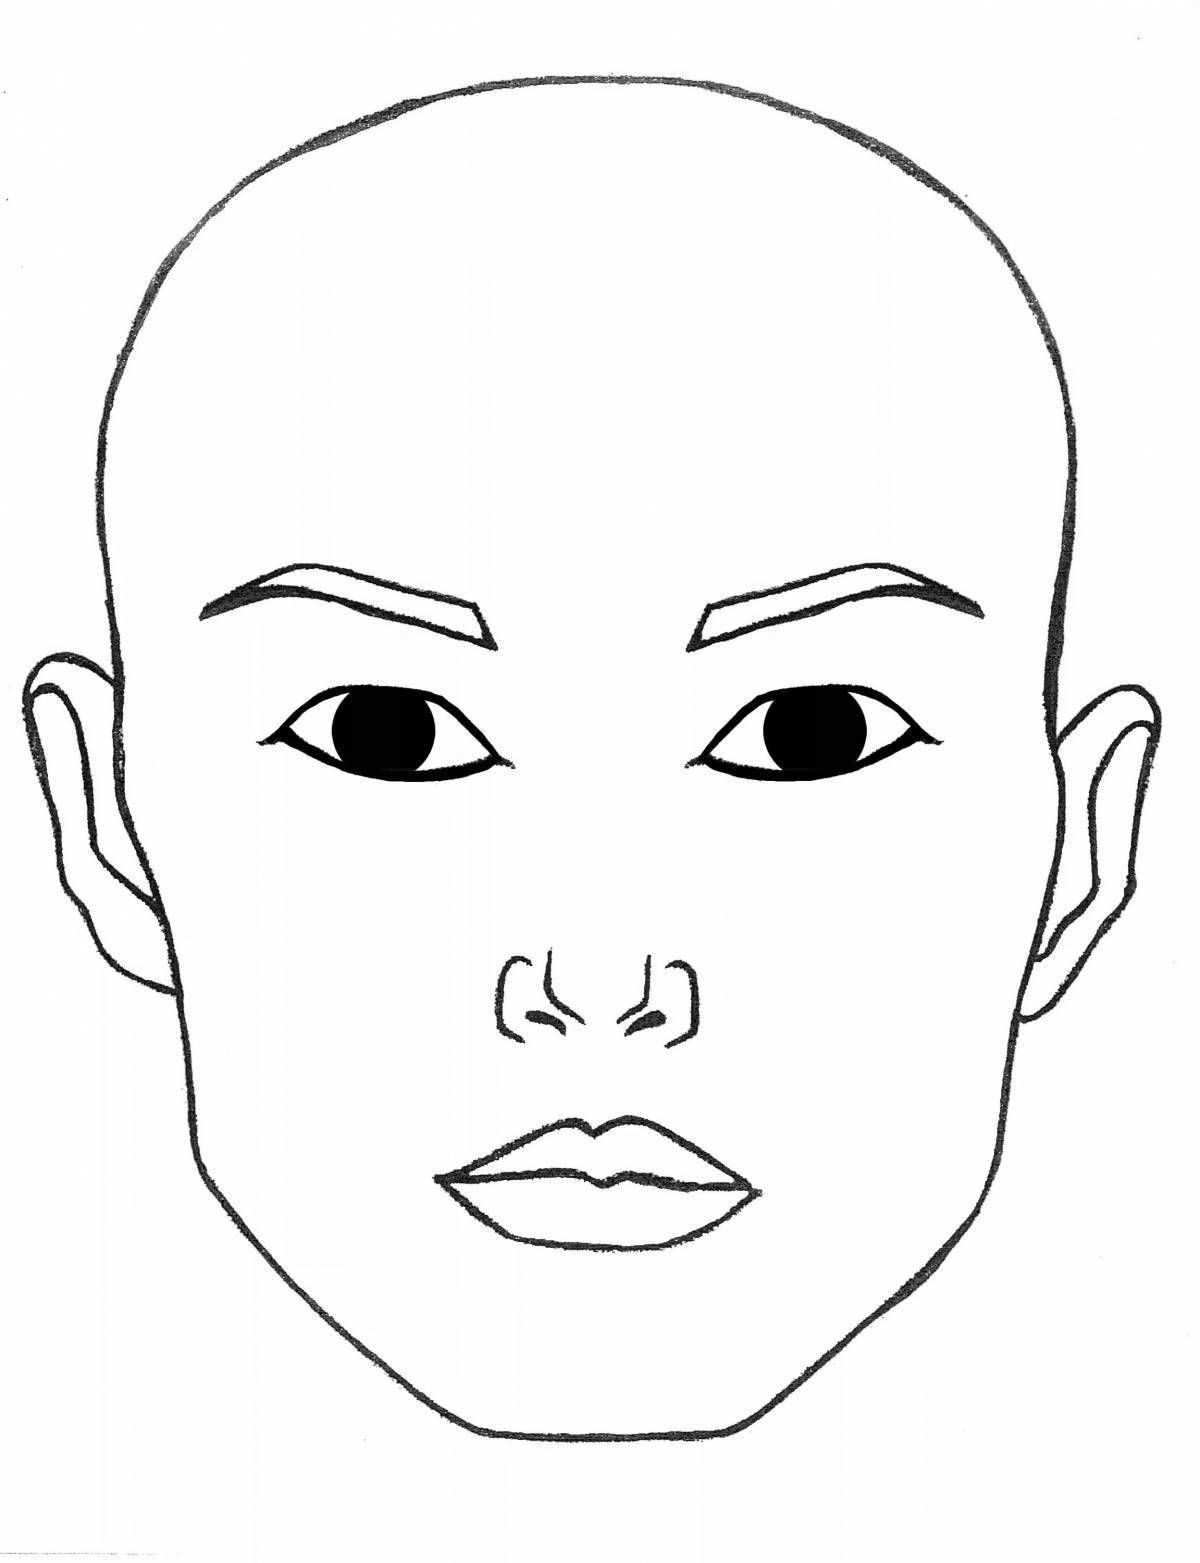 Coloring page of face with glowing makeup